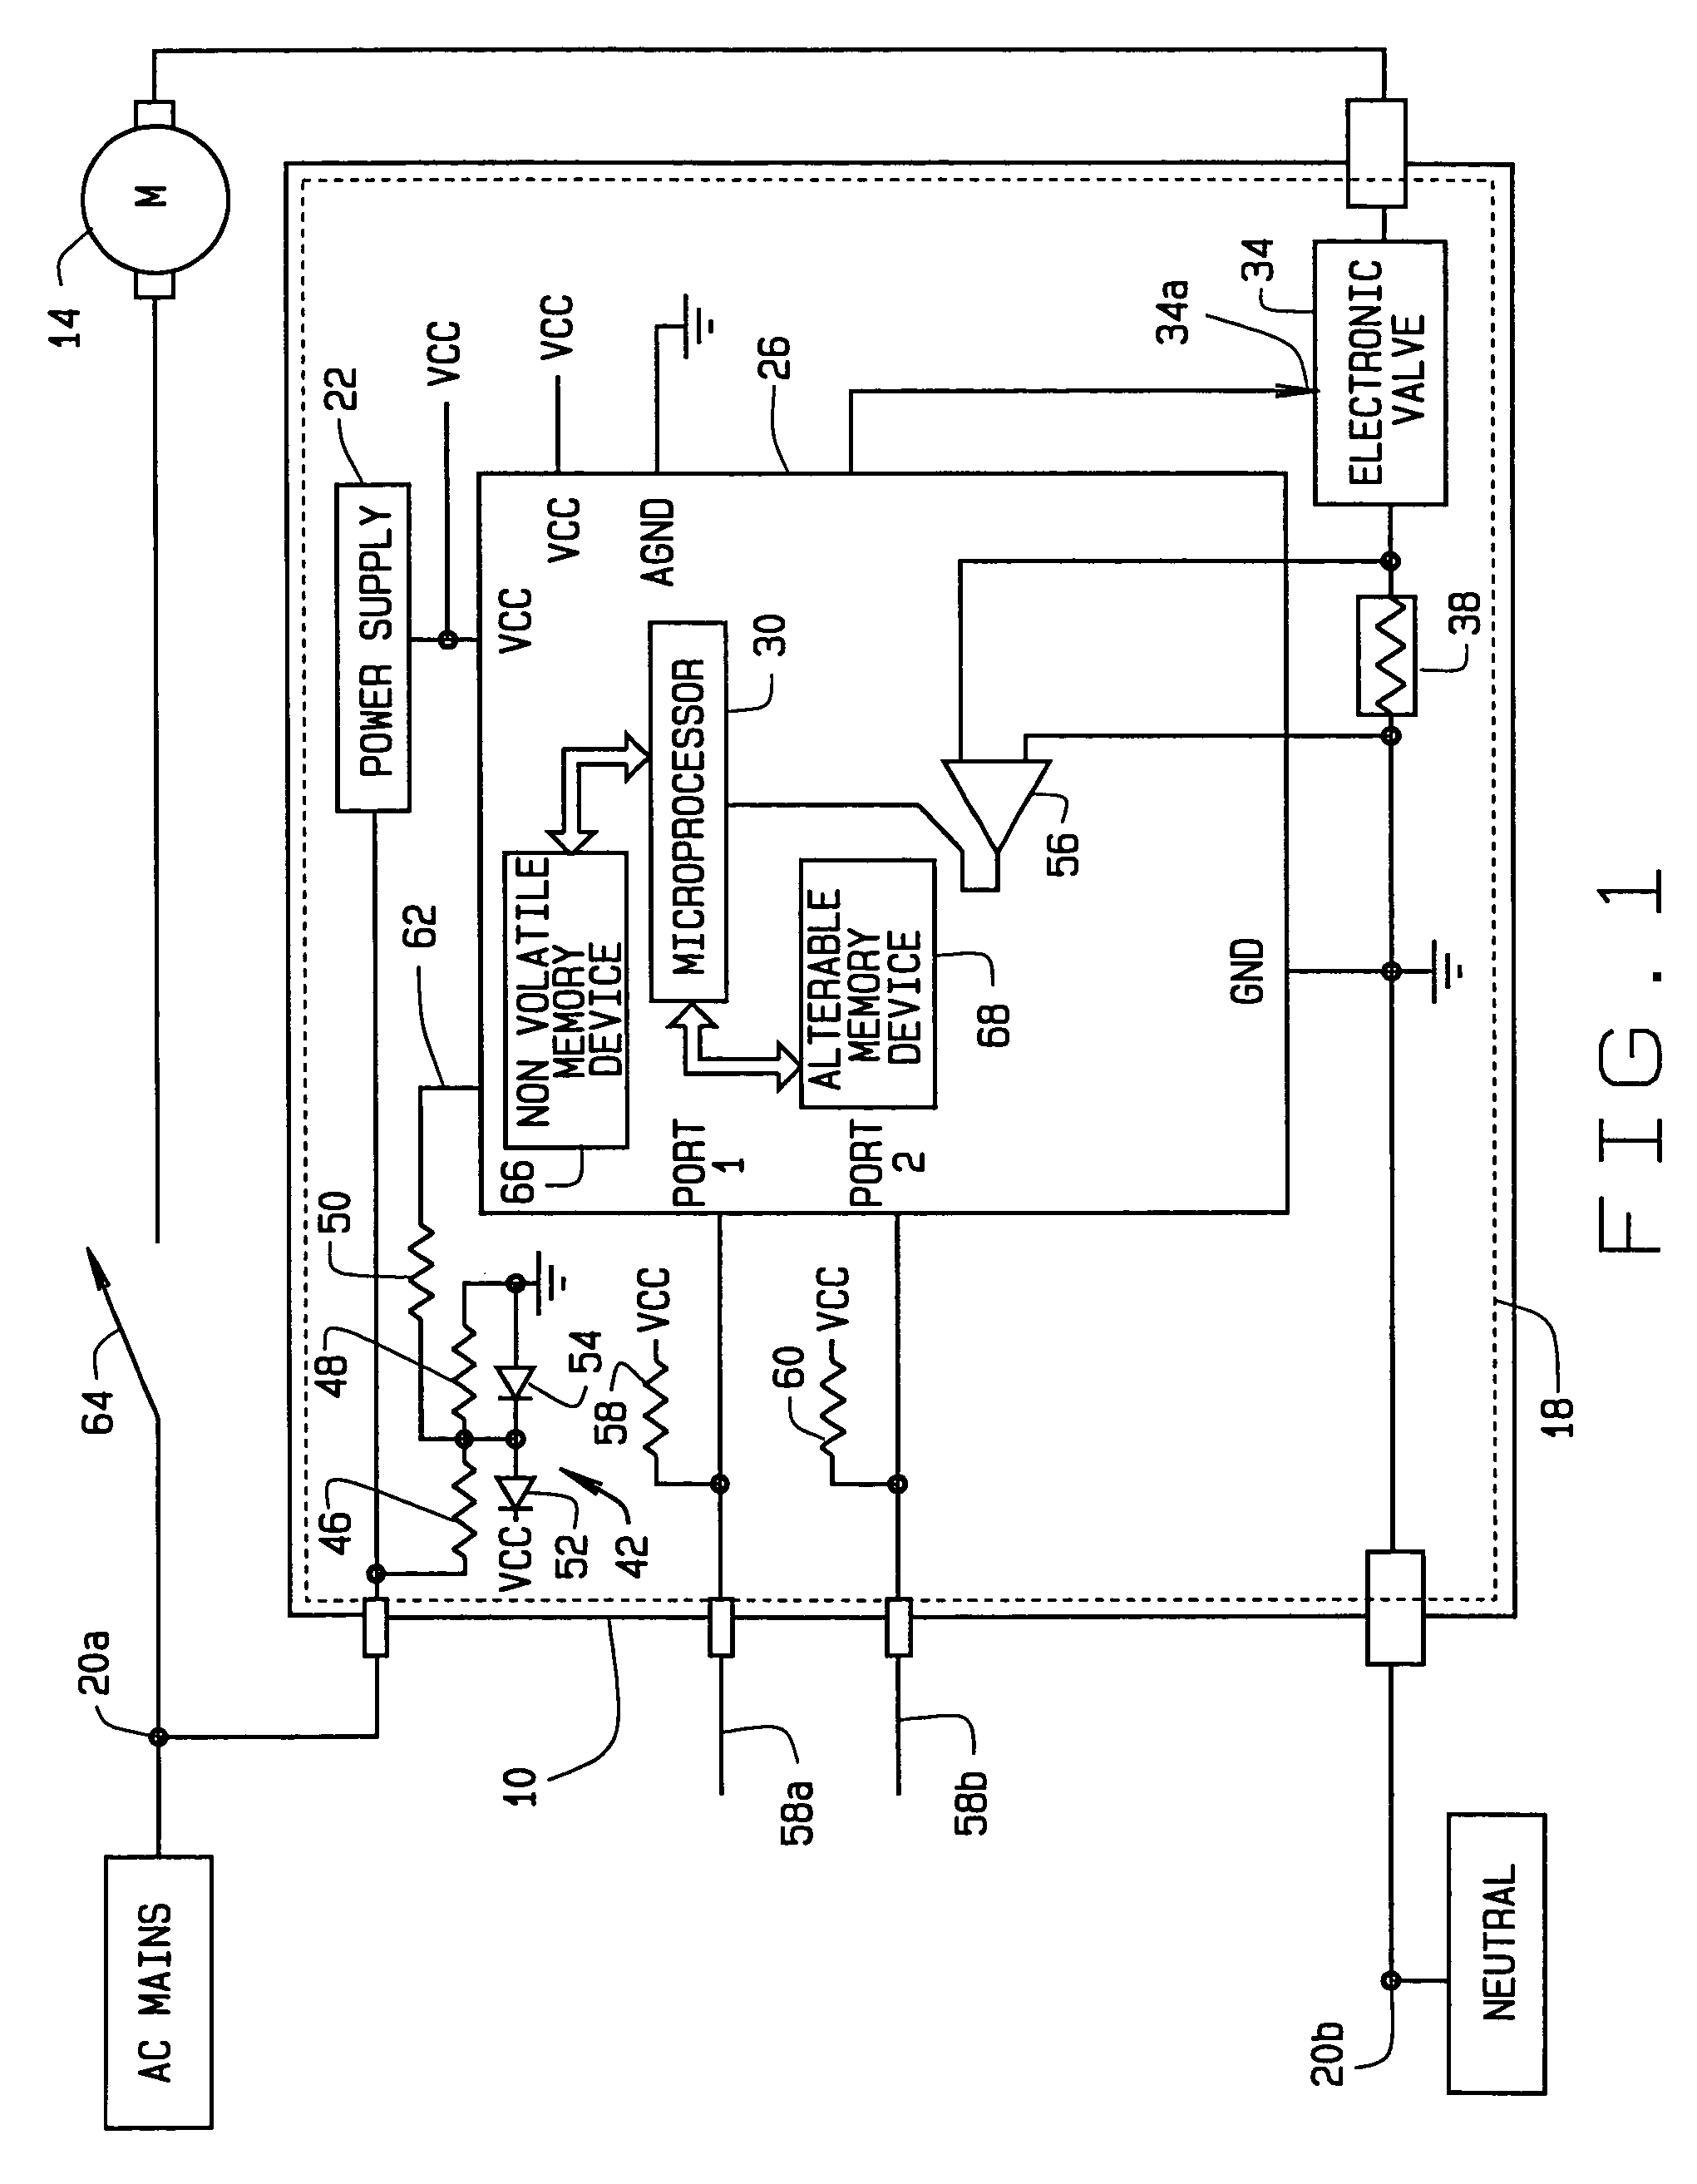 Generic motor control system and method